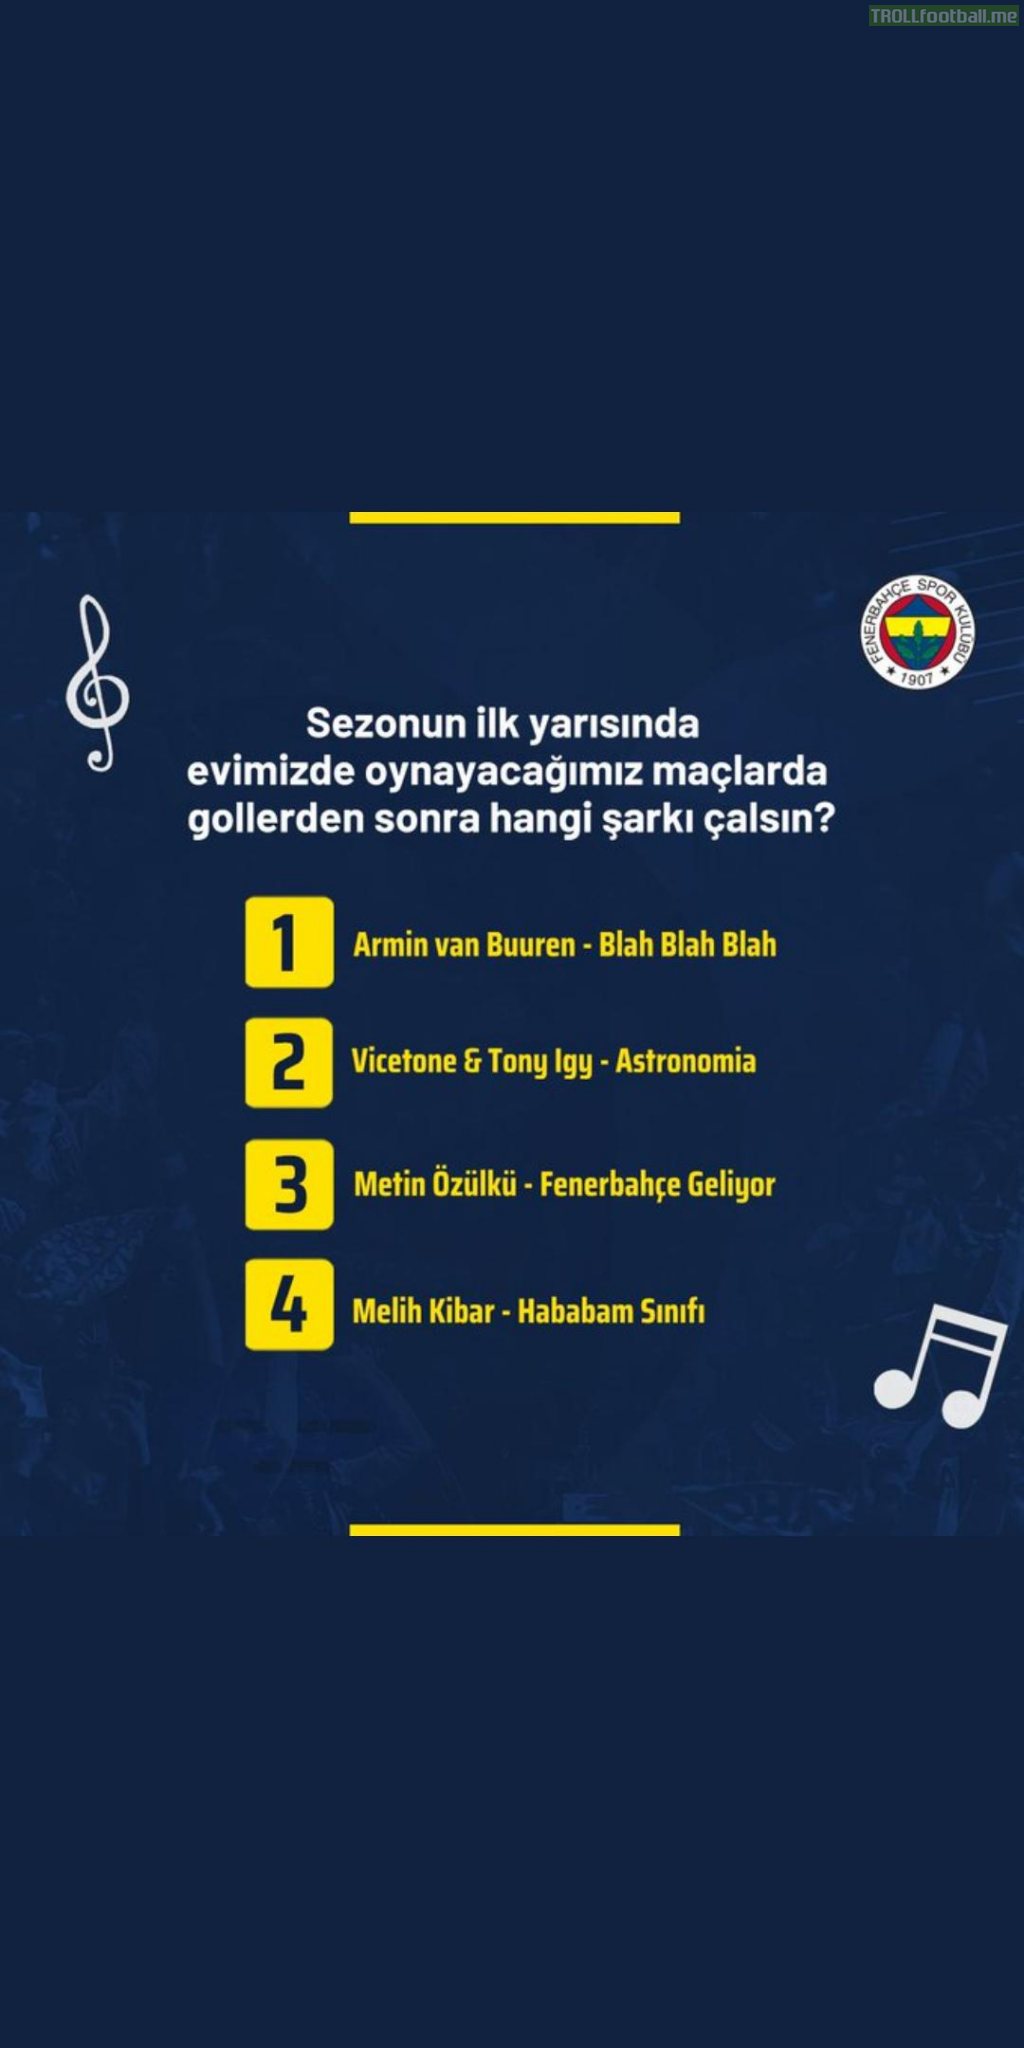 Fenerbahce let’s fans decide their after goal tune, Coffin Theme (nr 2) would be amazing.